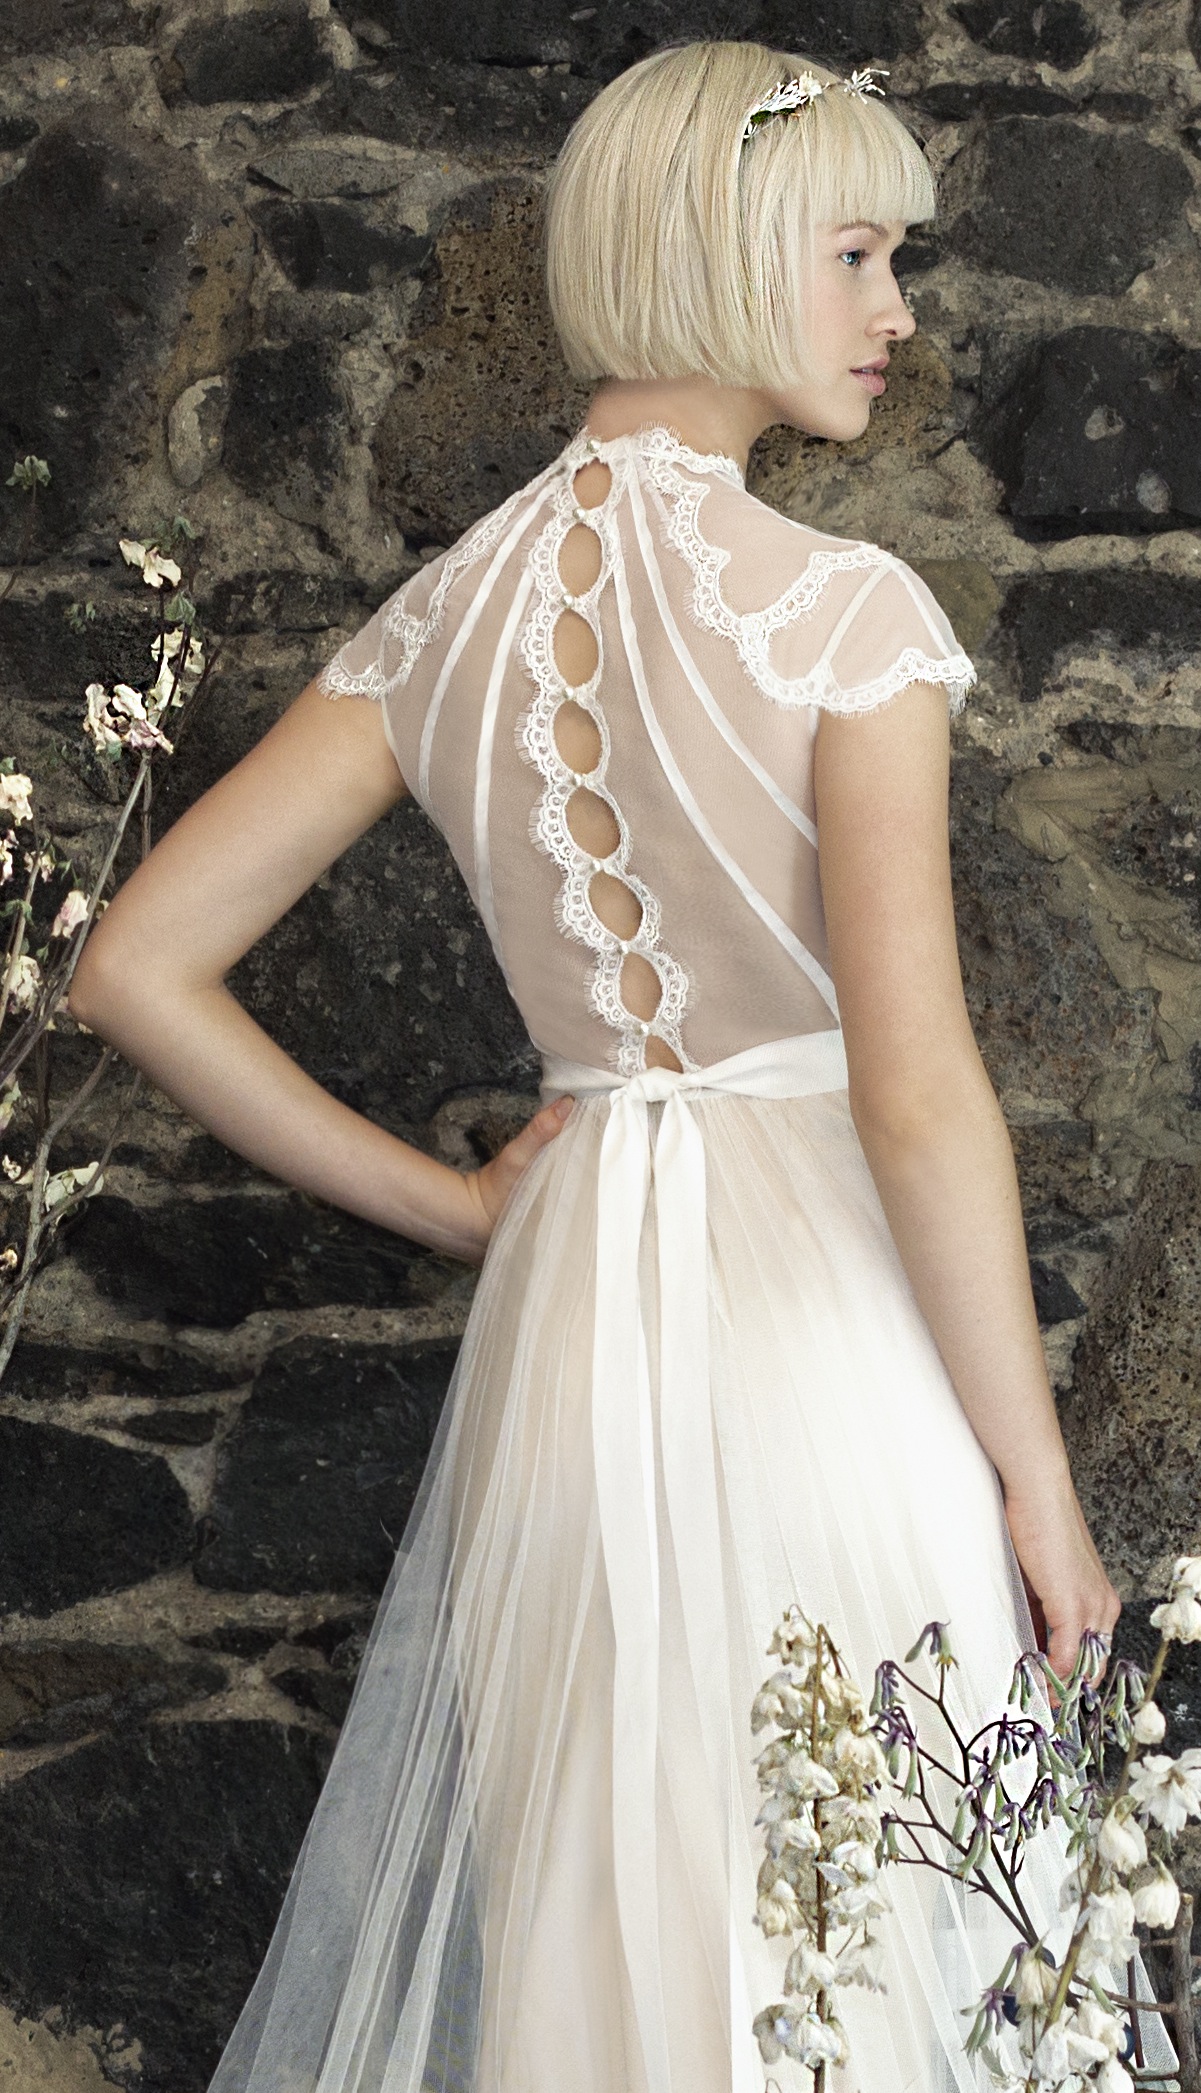 Western style nontraditional wedding dresses